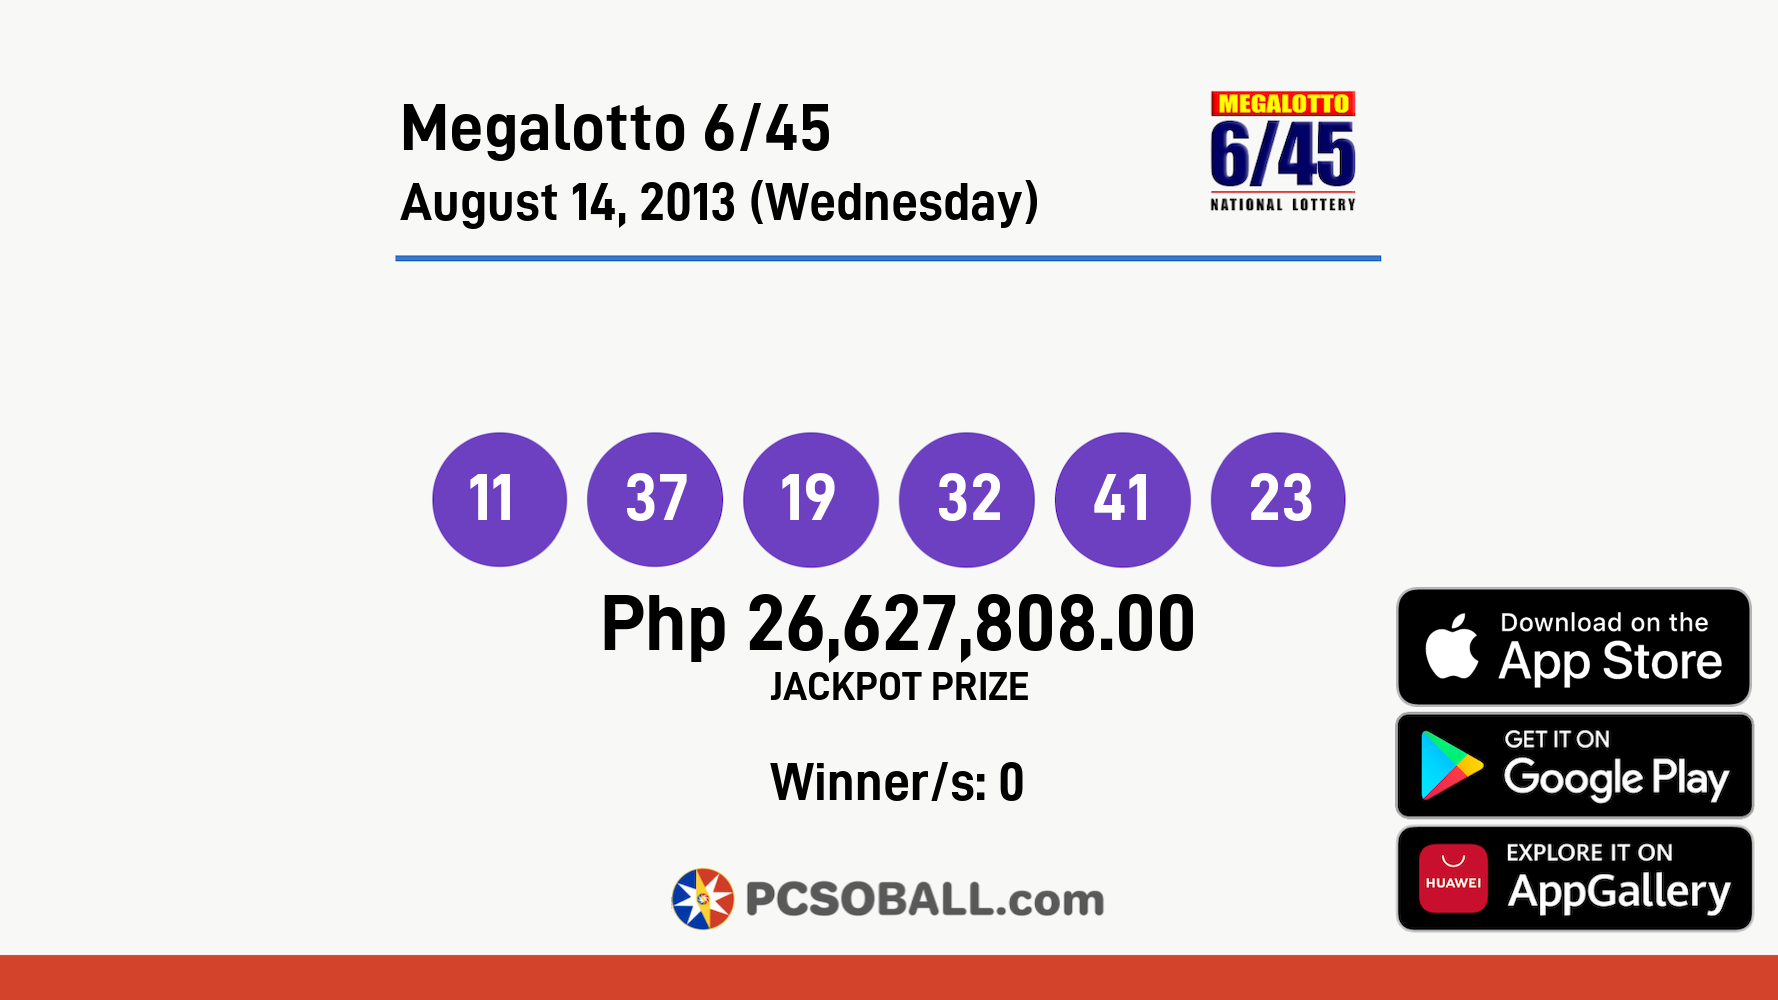 Megalotto 6/45 August 14, 2013 (Wednesday) Result